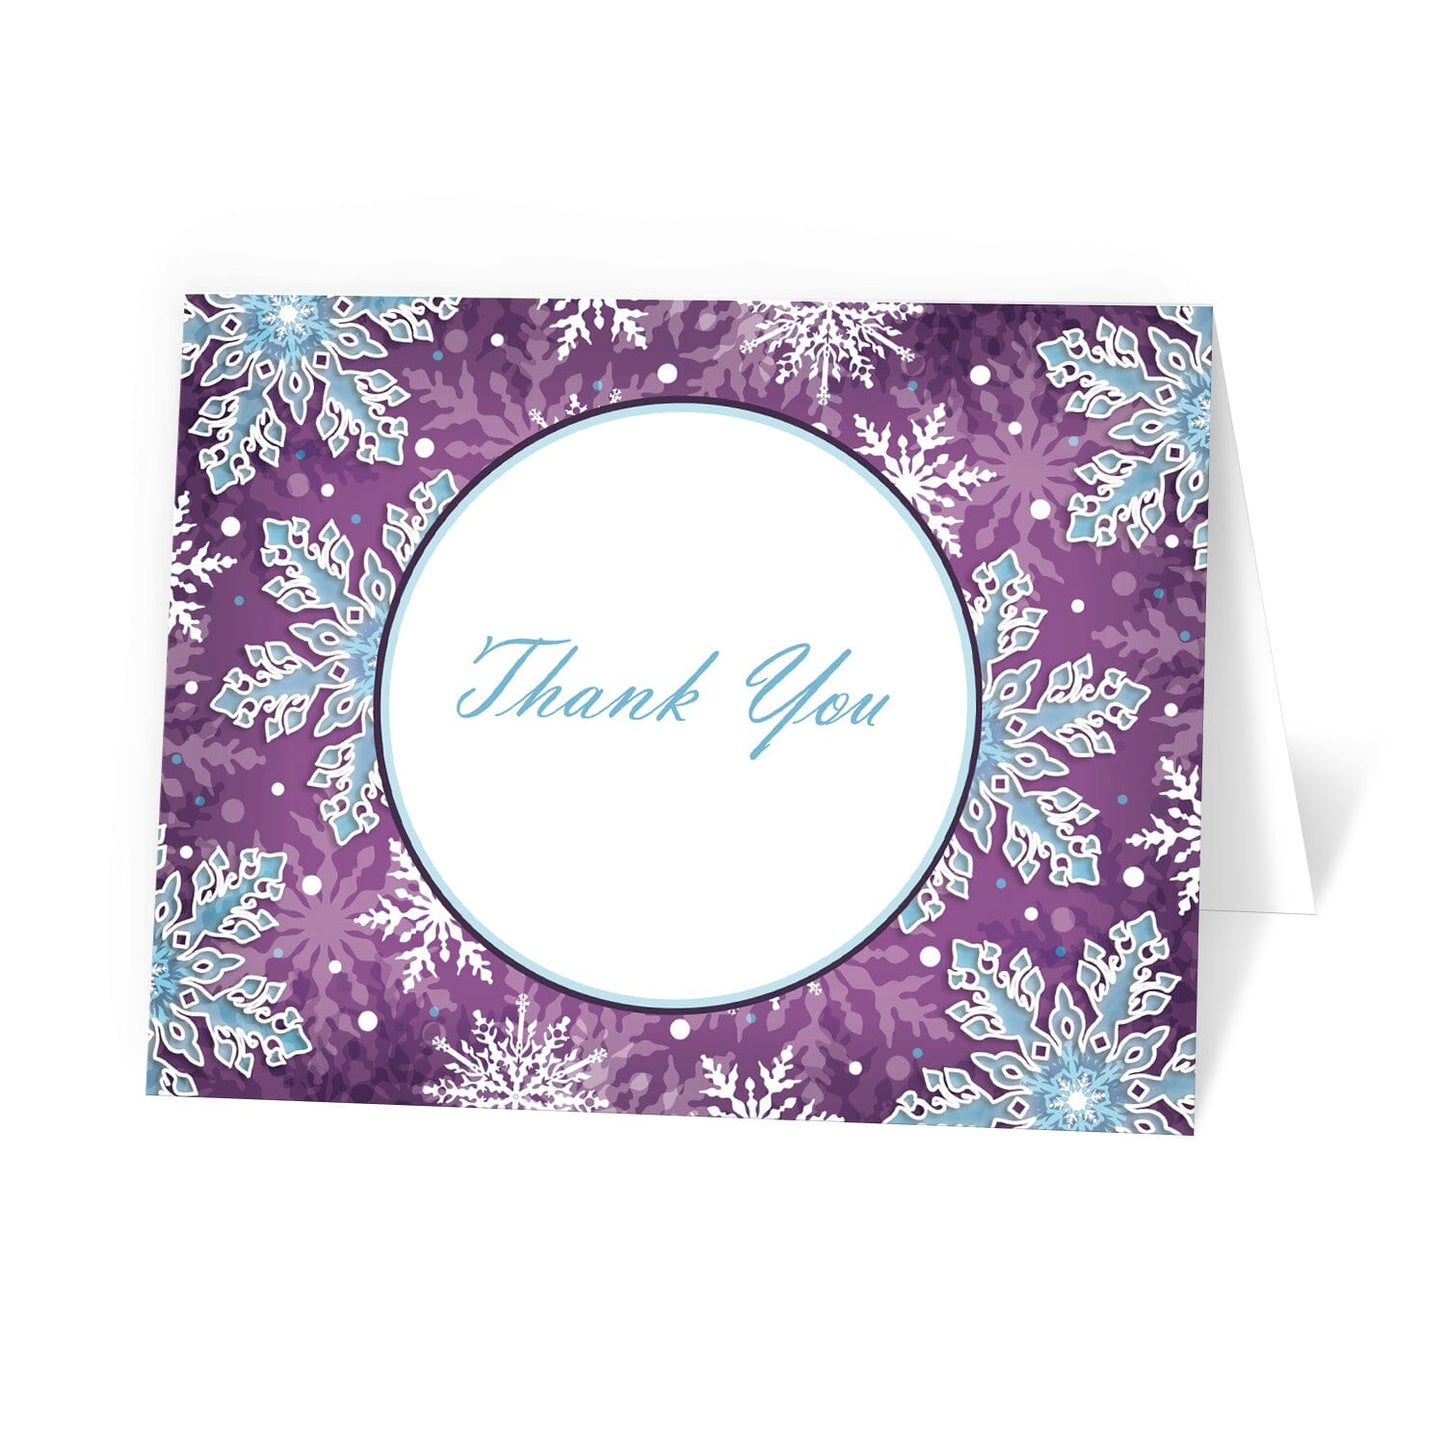 Modern Purple Blue Snowflake Thank You Cards at Artistically Invited.